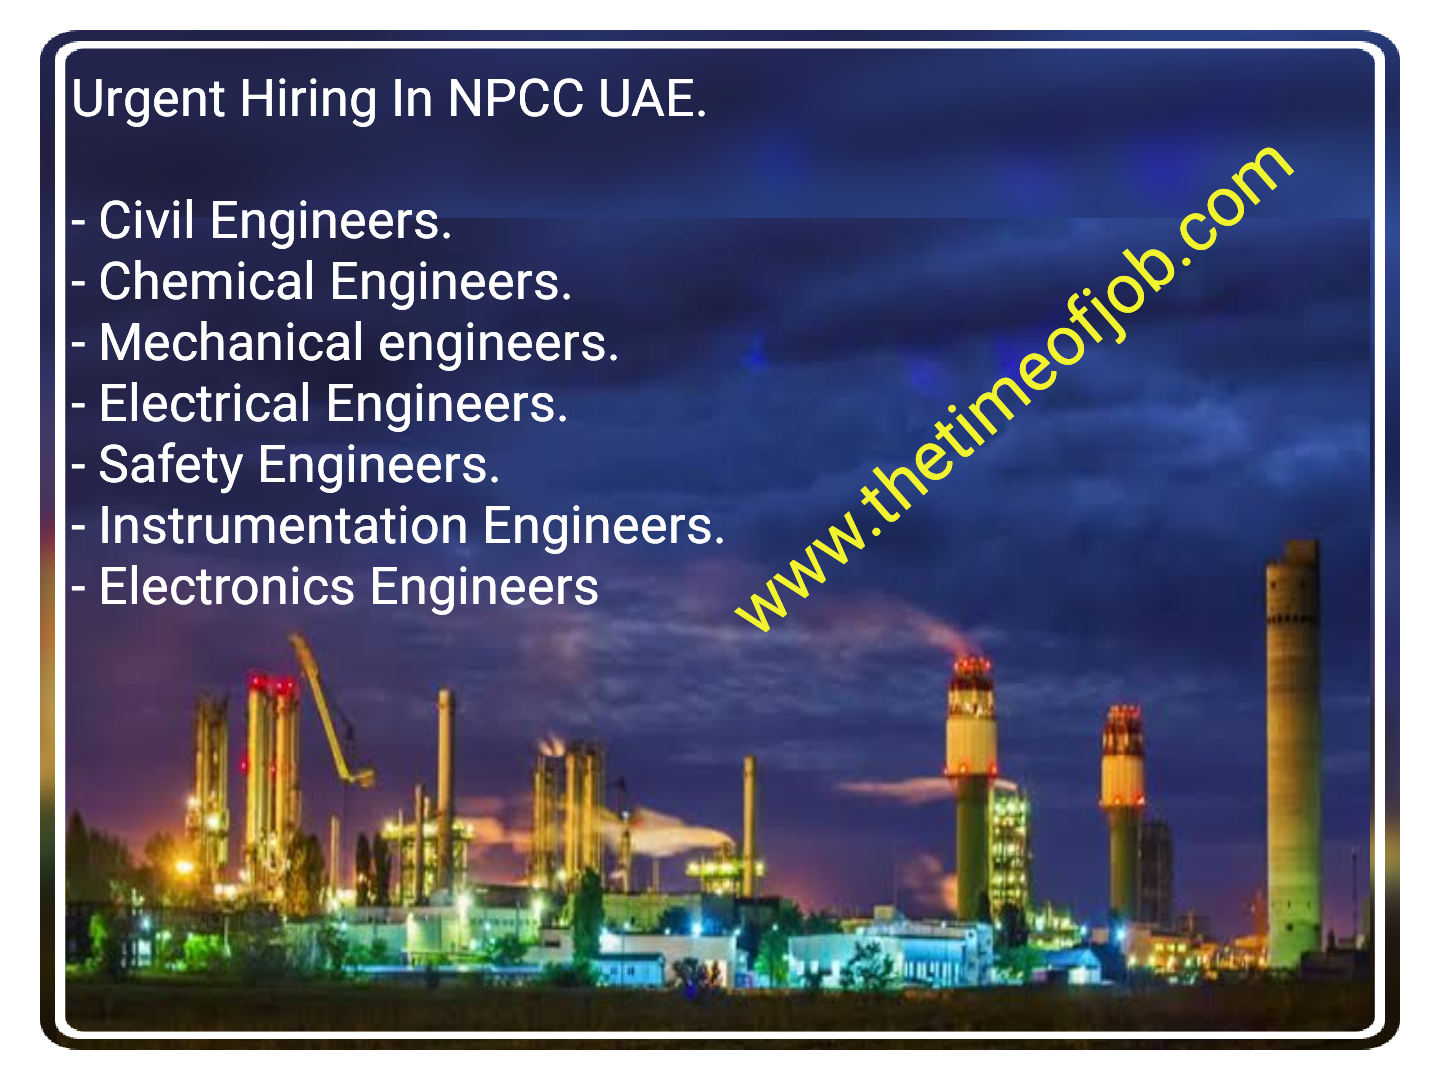 Civil, Chemical, Mechanical, Electrical, Instrument & Safety Engineer Jobs